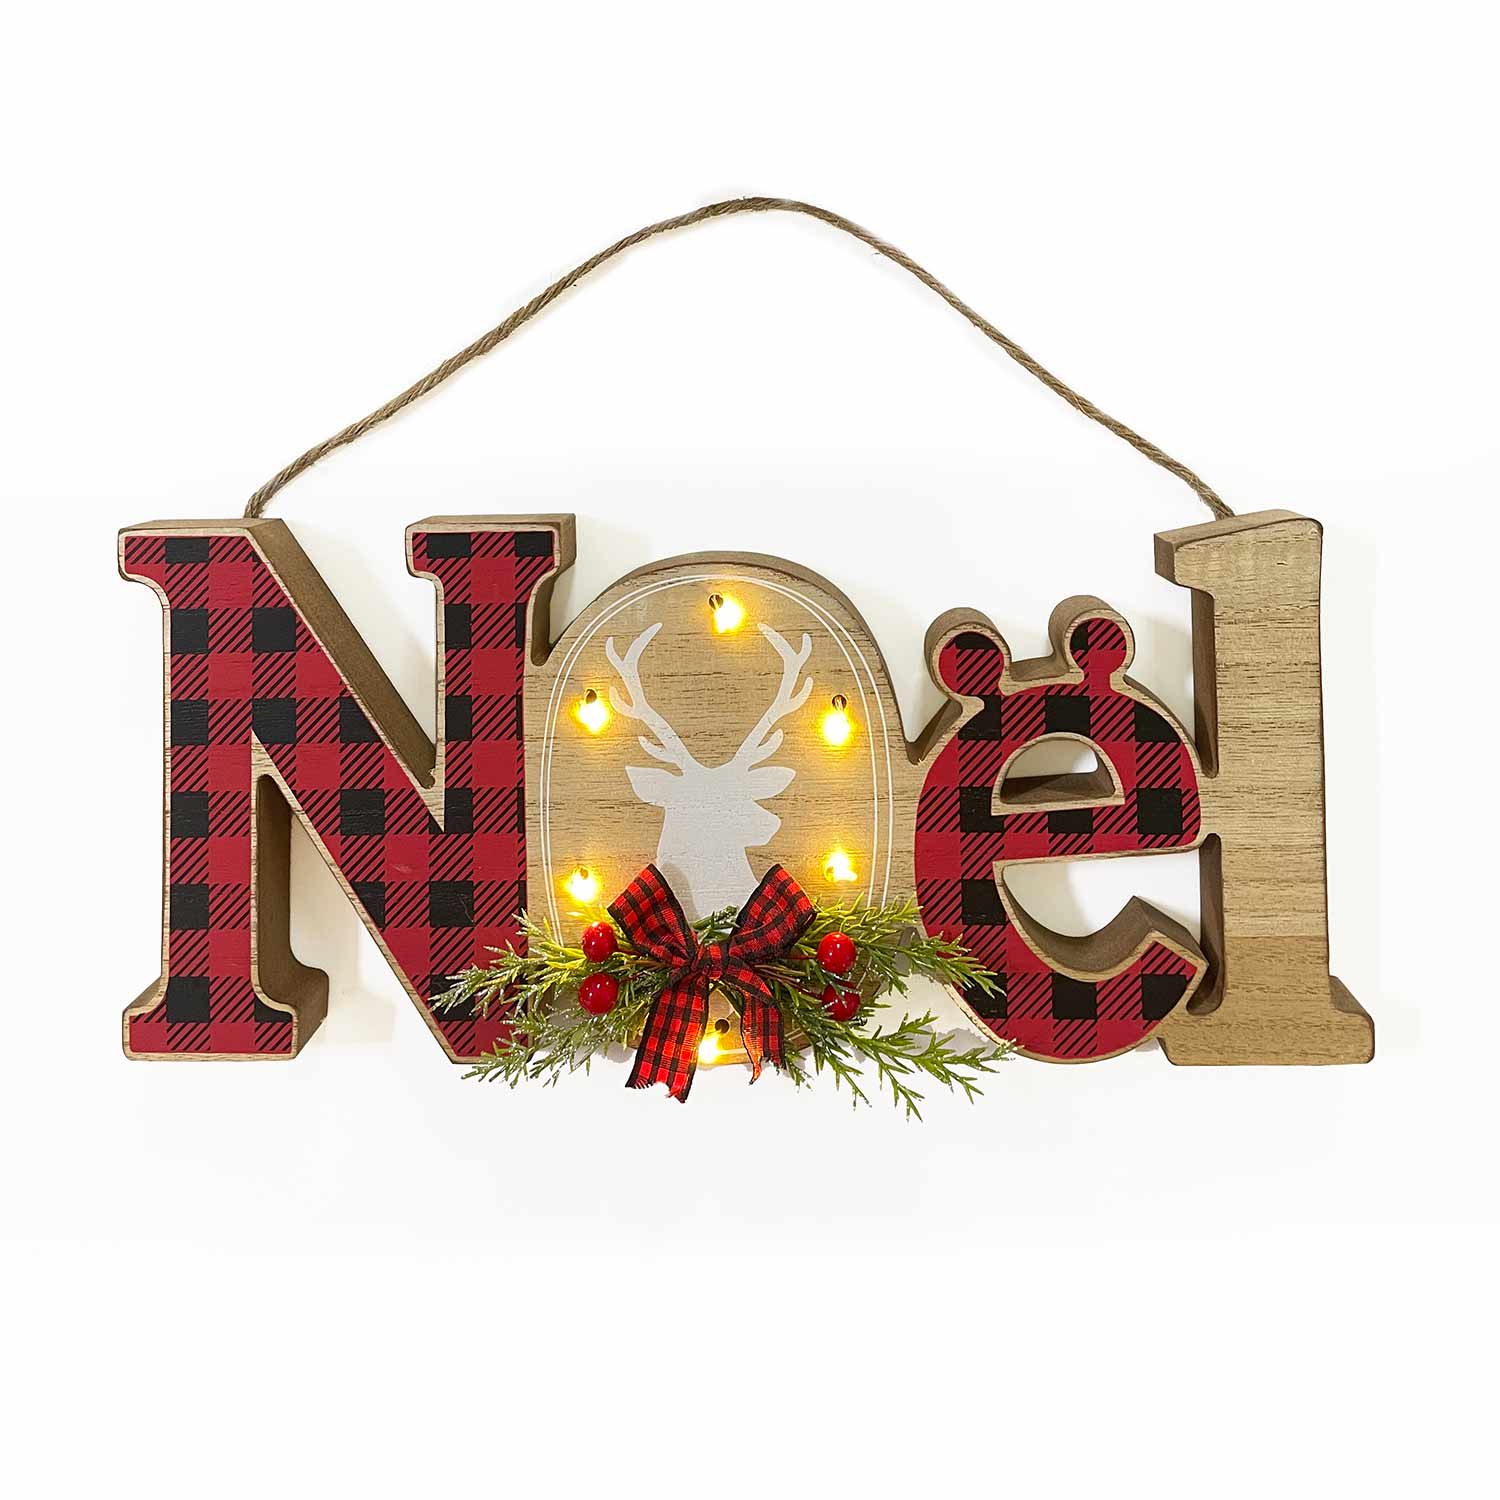 Light-up Wooden NOËL tabletop sign with red plaid pattern